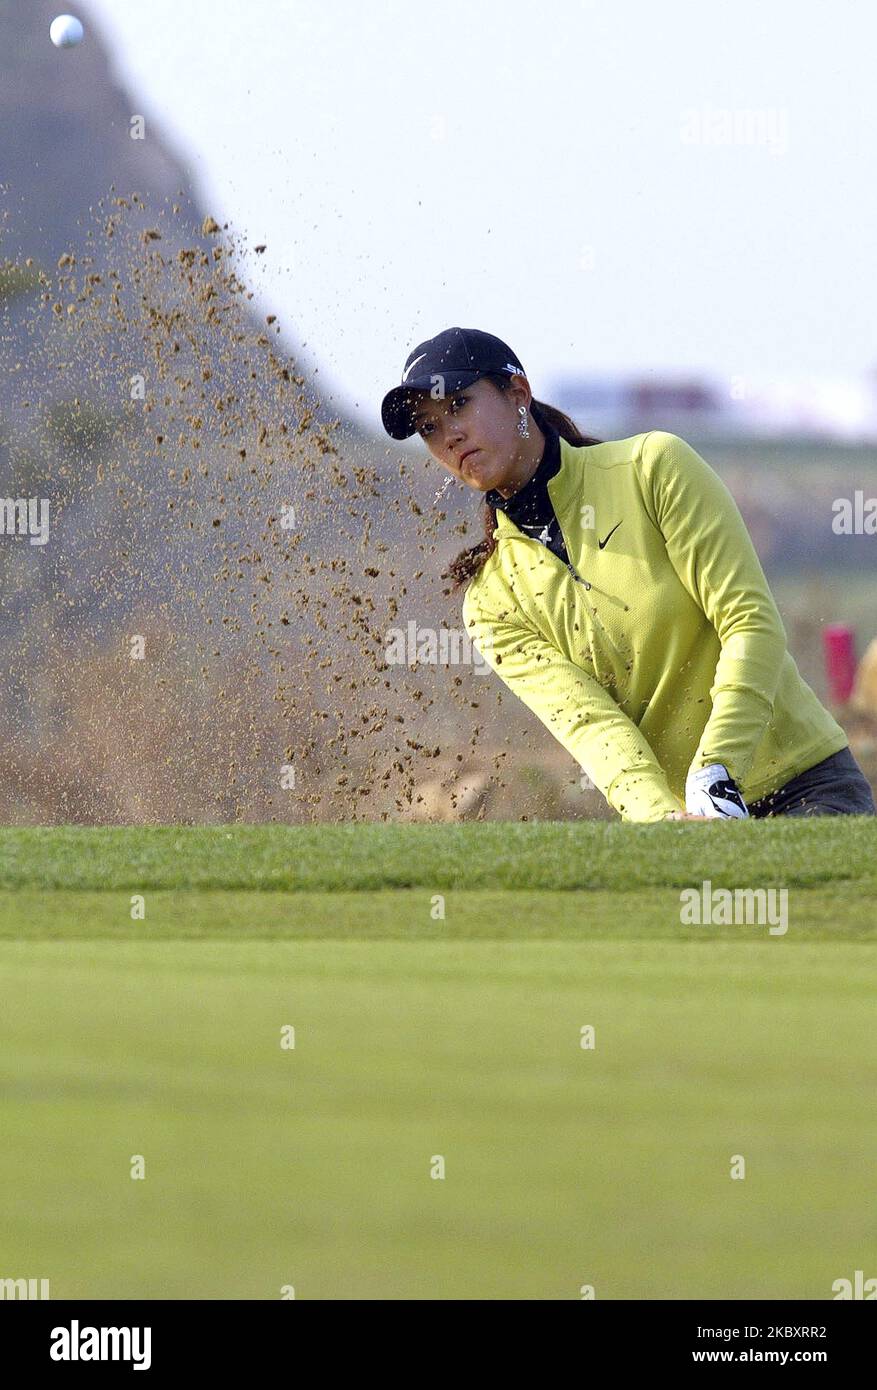 Professional golfer Michelle Wie in action during an Nike Golf event match at SKY72 golf course in Incheon, South Korea on May 5, 2006 (Photo by Seung-il Ryu/NurPhoto) Stock Photo